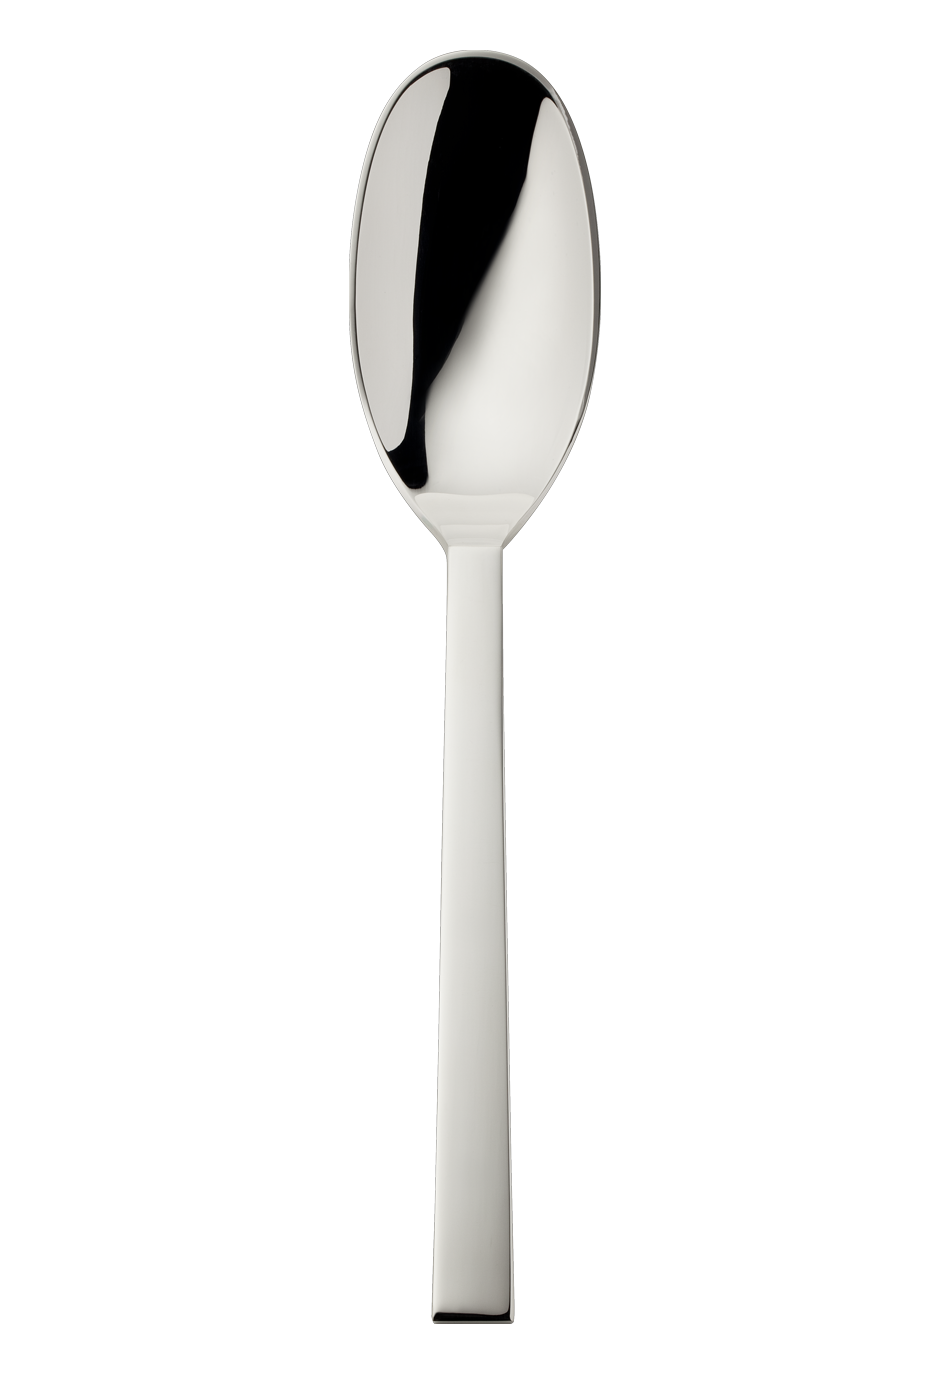 Sphinx Serving Spoon (150g massive silverplated)